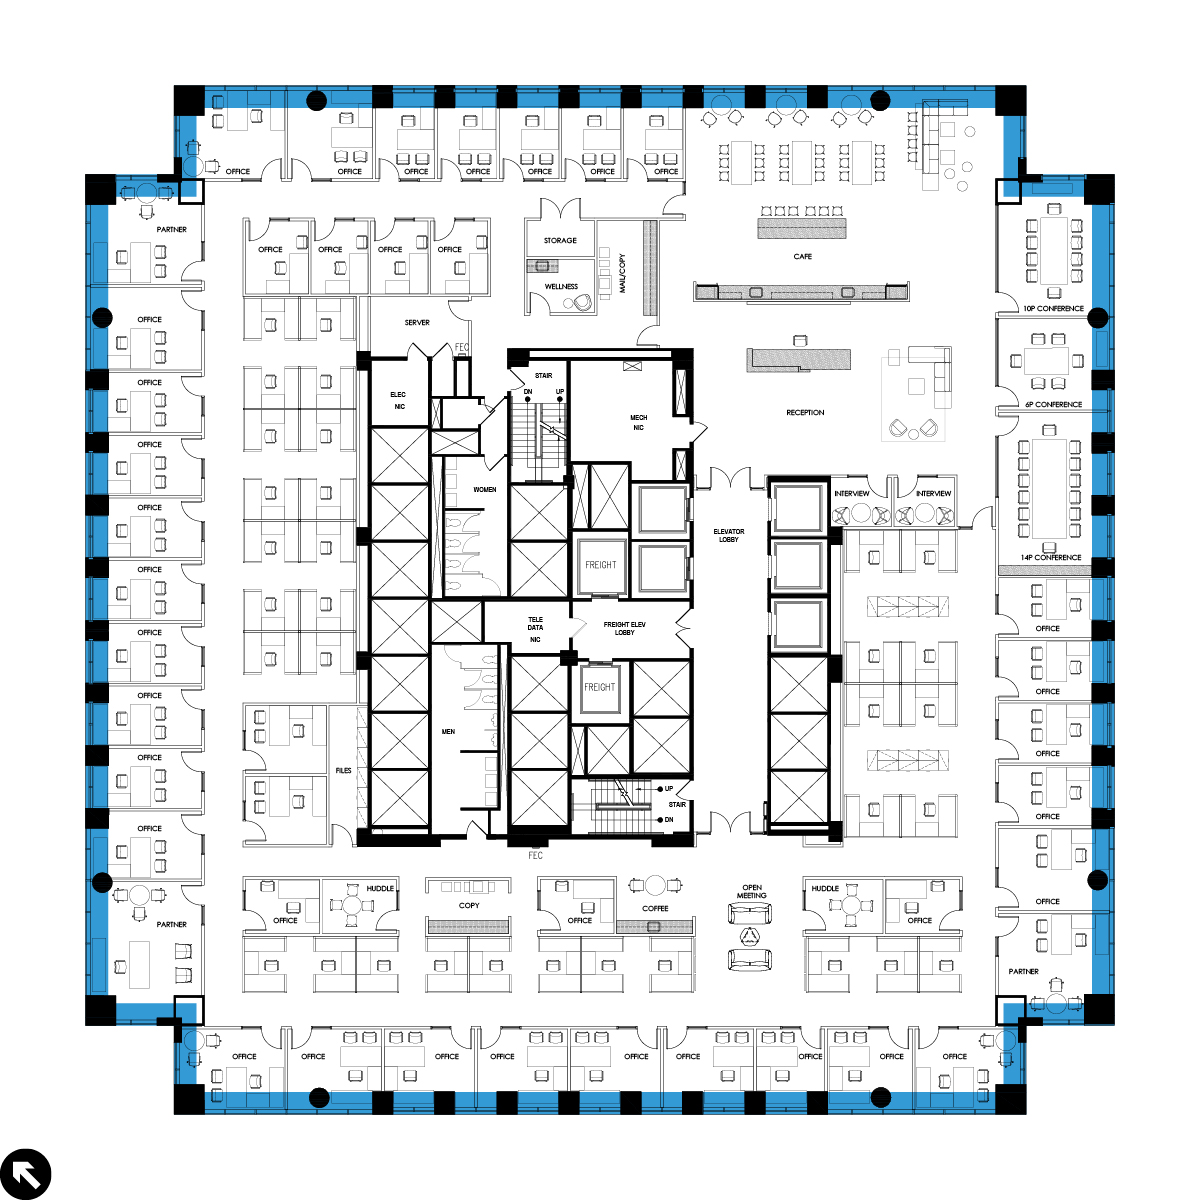 Proposed Office Intensive Layout Floorplan